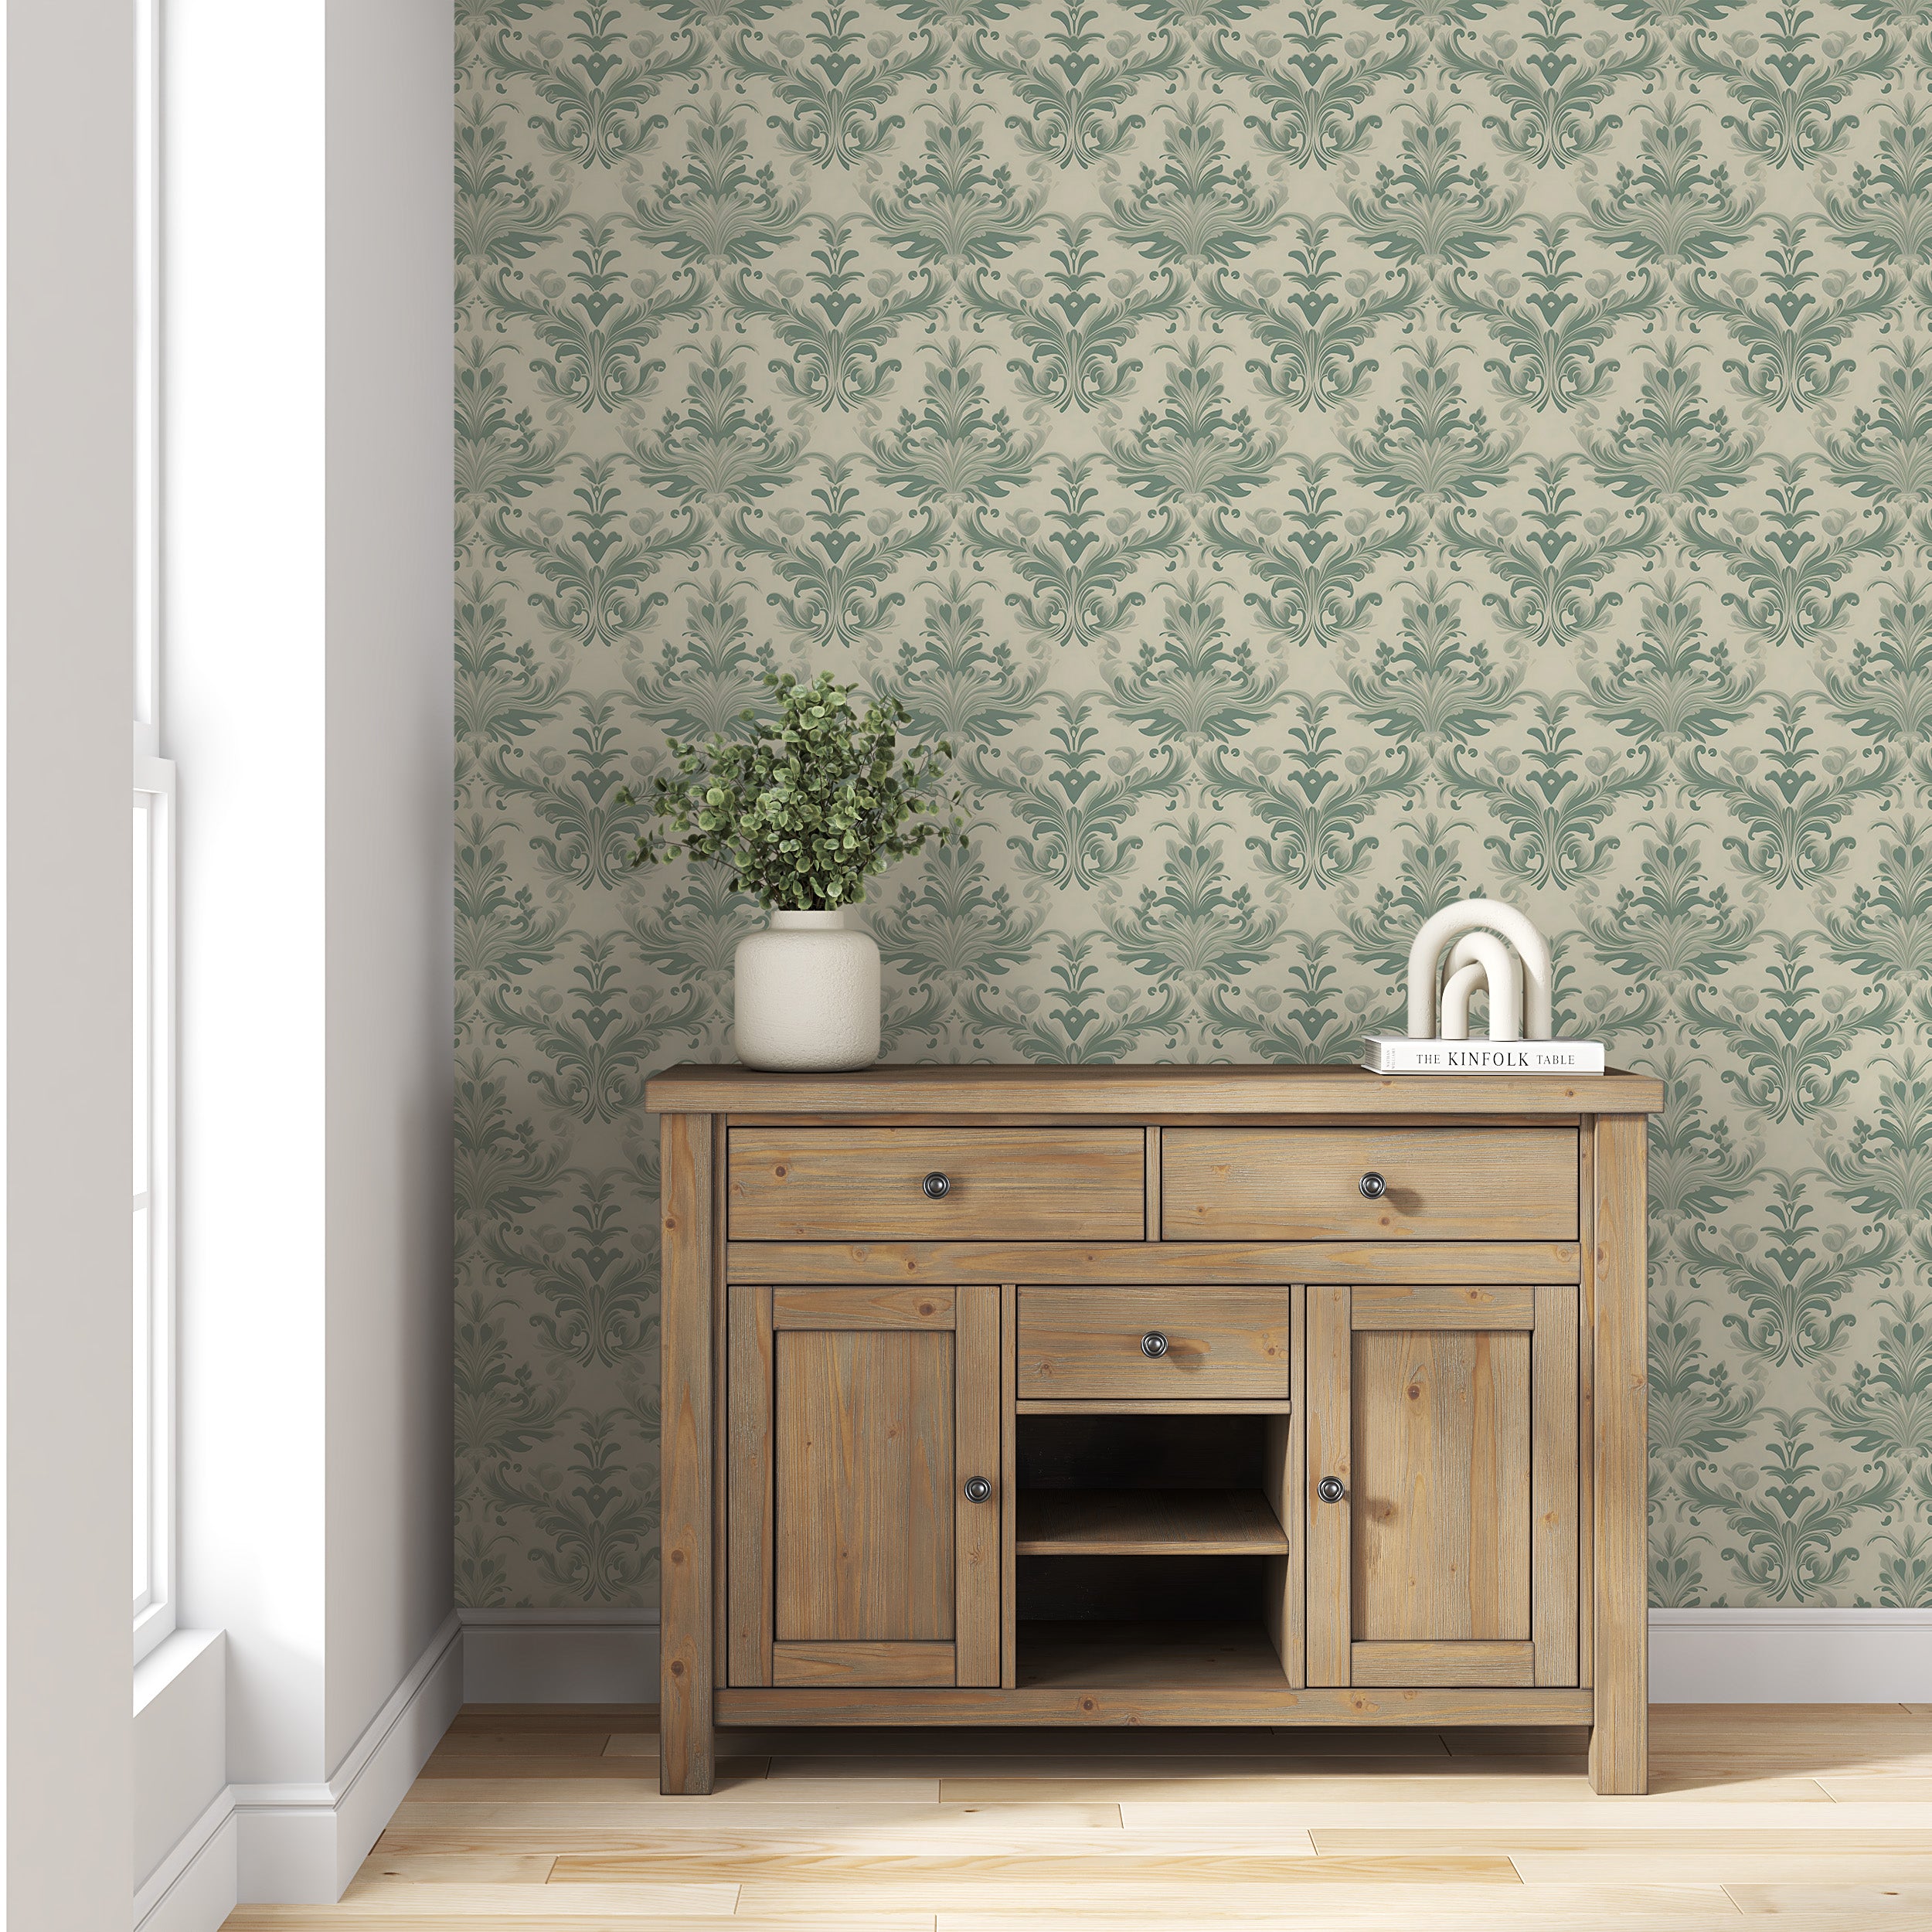 Traditional Wall Decal Detail in Green and Beige